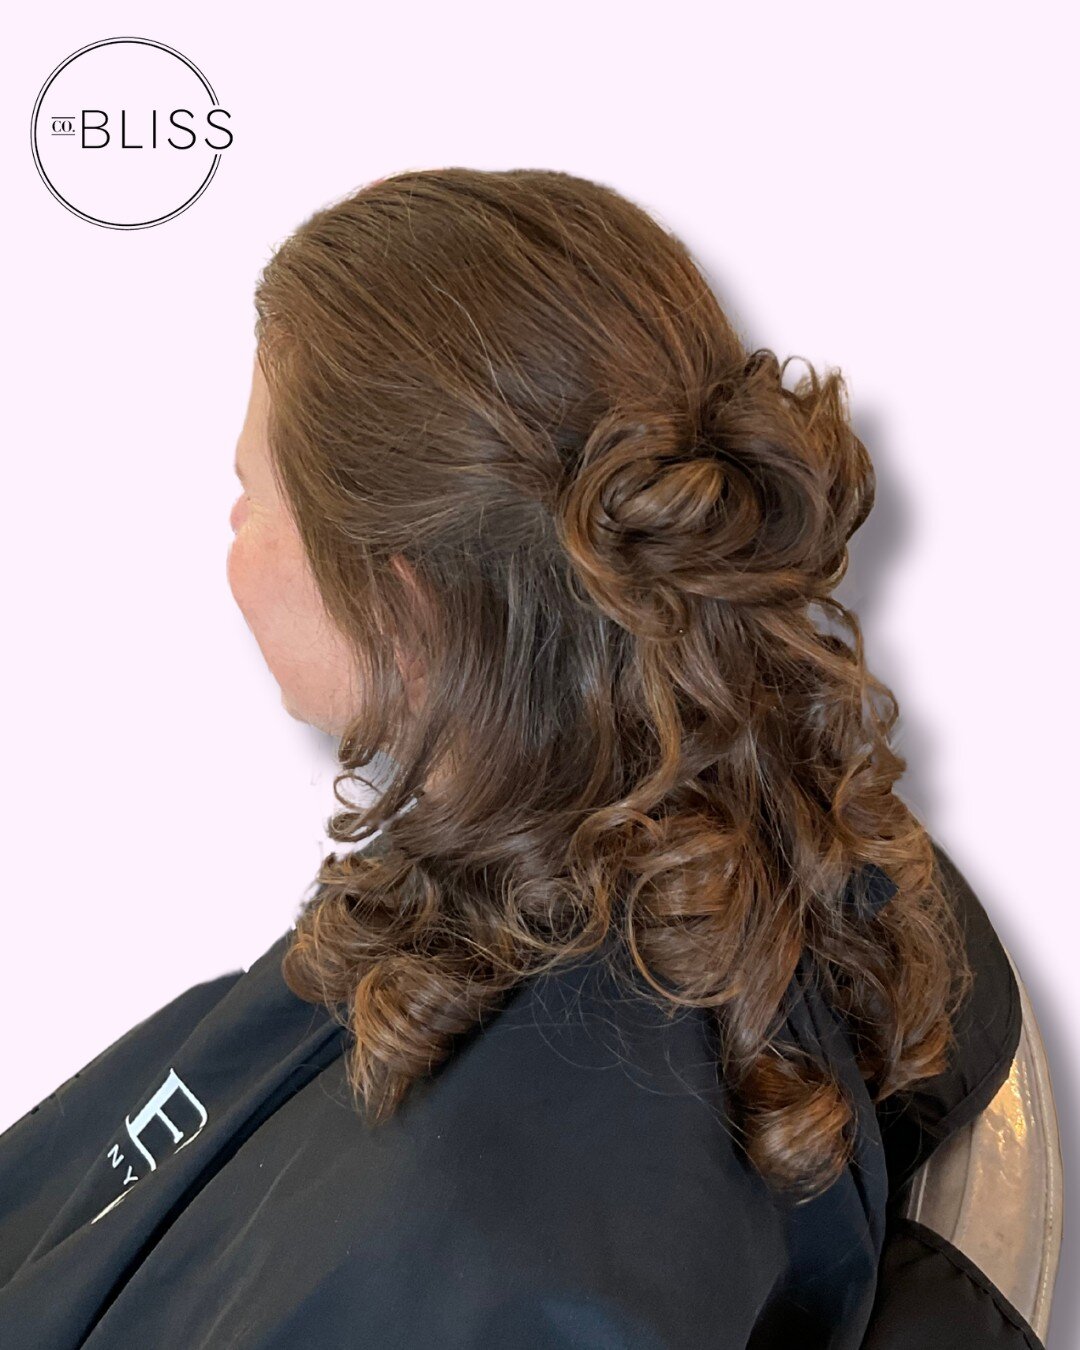 👰💖 Bridal Elegance by Amy! ✨💇&zwj;♀️

Amy works her magic once again, crafting a bridal hairstyle that's as stunning as you are on your special day. 

Let's create the perfect look to make your wedding dreams come true! 💍✨

#bridalhairinspo  #wed